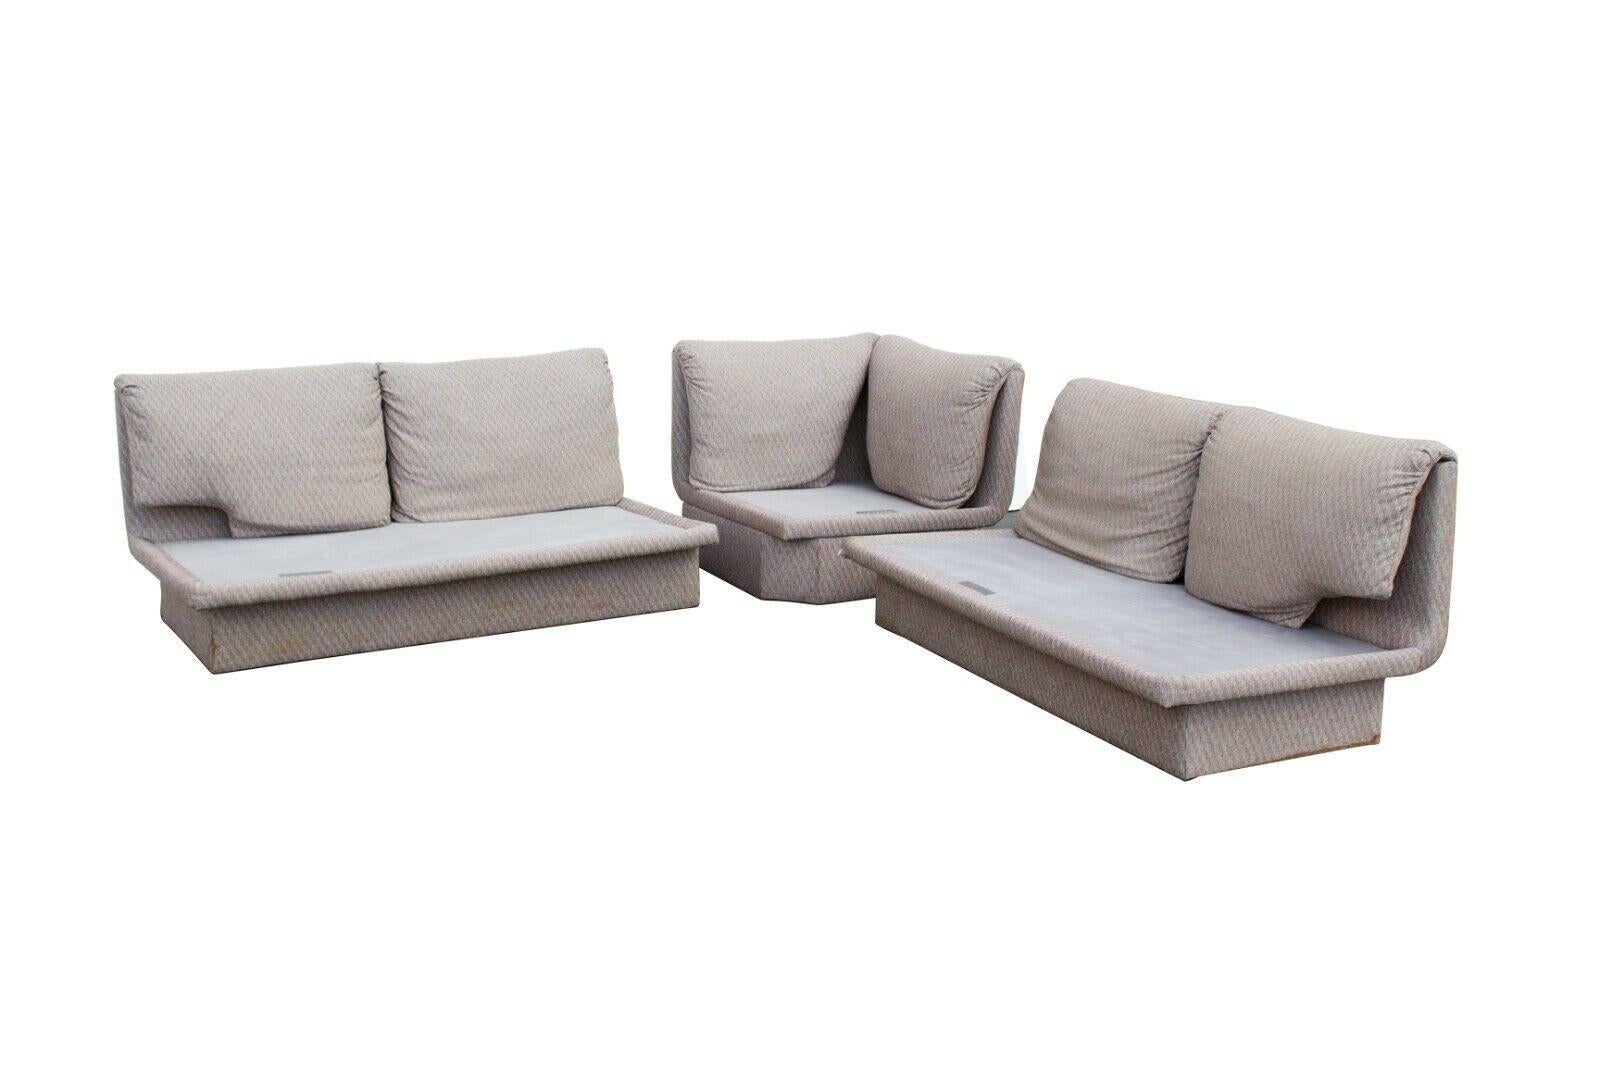 Late 20th Century Vintage 1980s Modular Sectional Sofa by Bernhardt, 3 Pcs